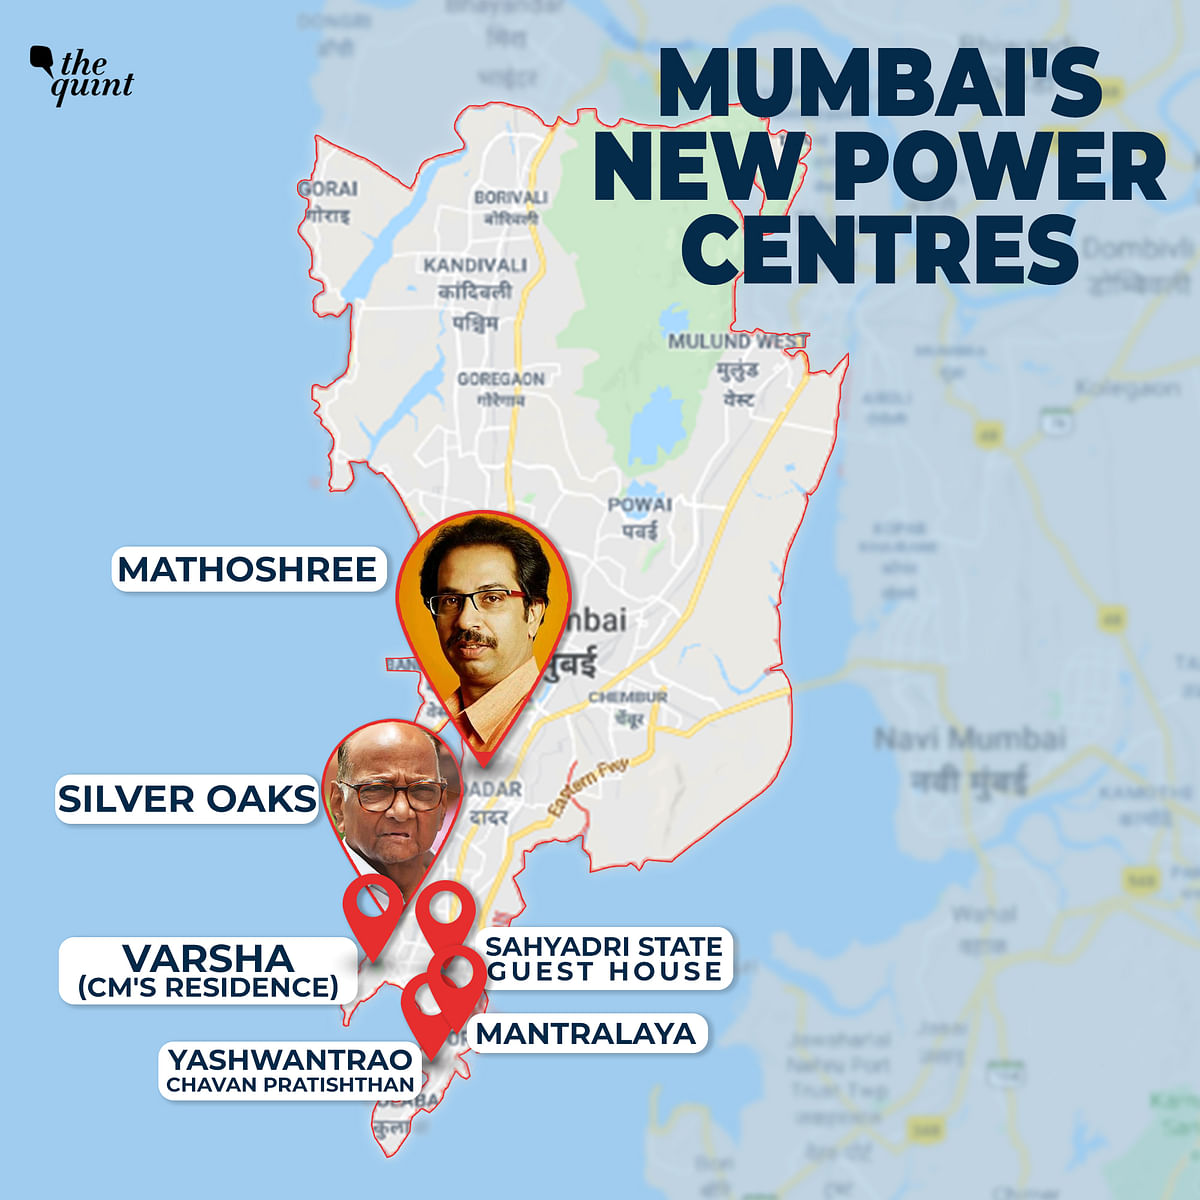 ‘Power’ has some new addresses in Maharashtra with the change of guard at the helm of the state.